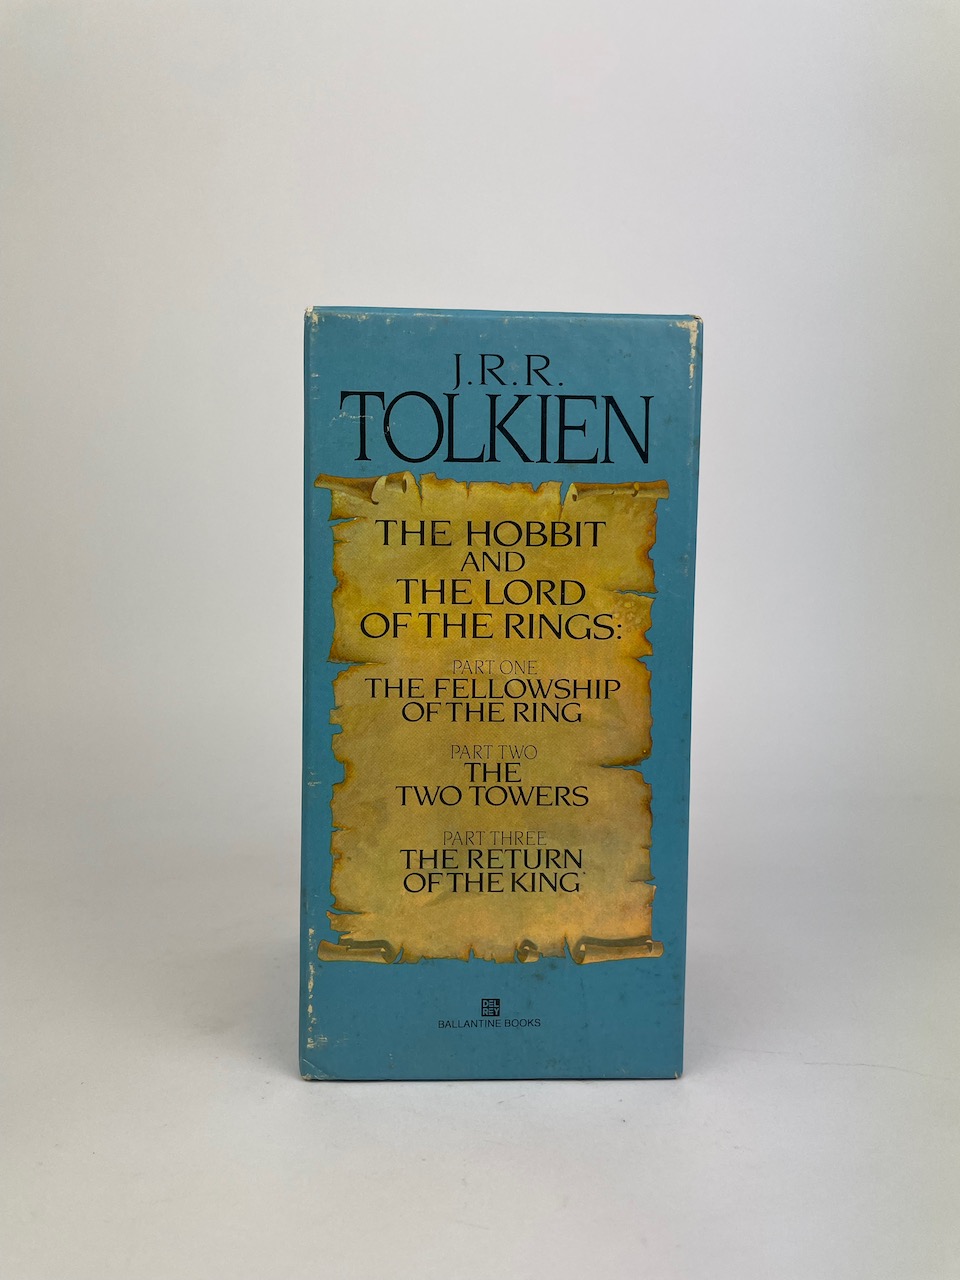 The Hobbit and The Lord of the Rings, Four Paperback Book Boxset from 1986, Blue Slipcase art by J.R.R. Tolkien 5